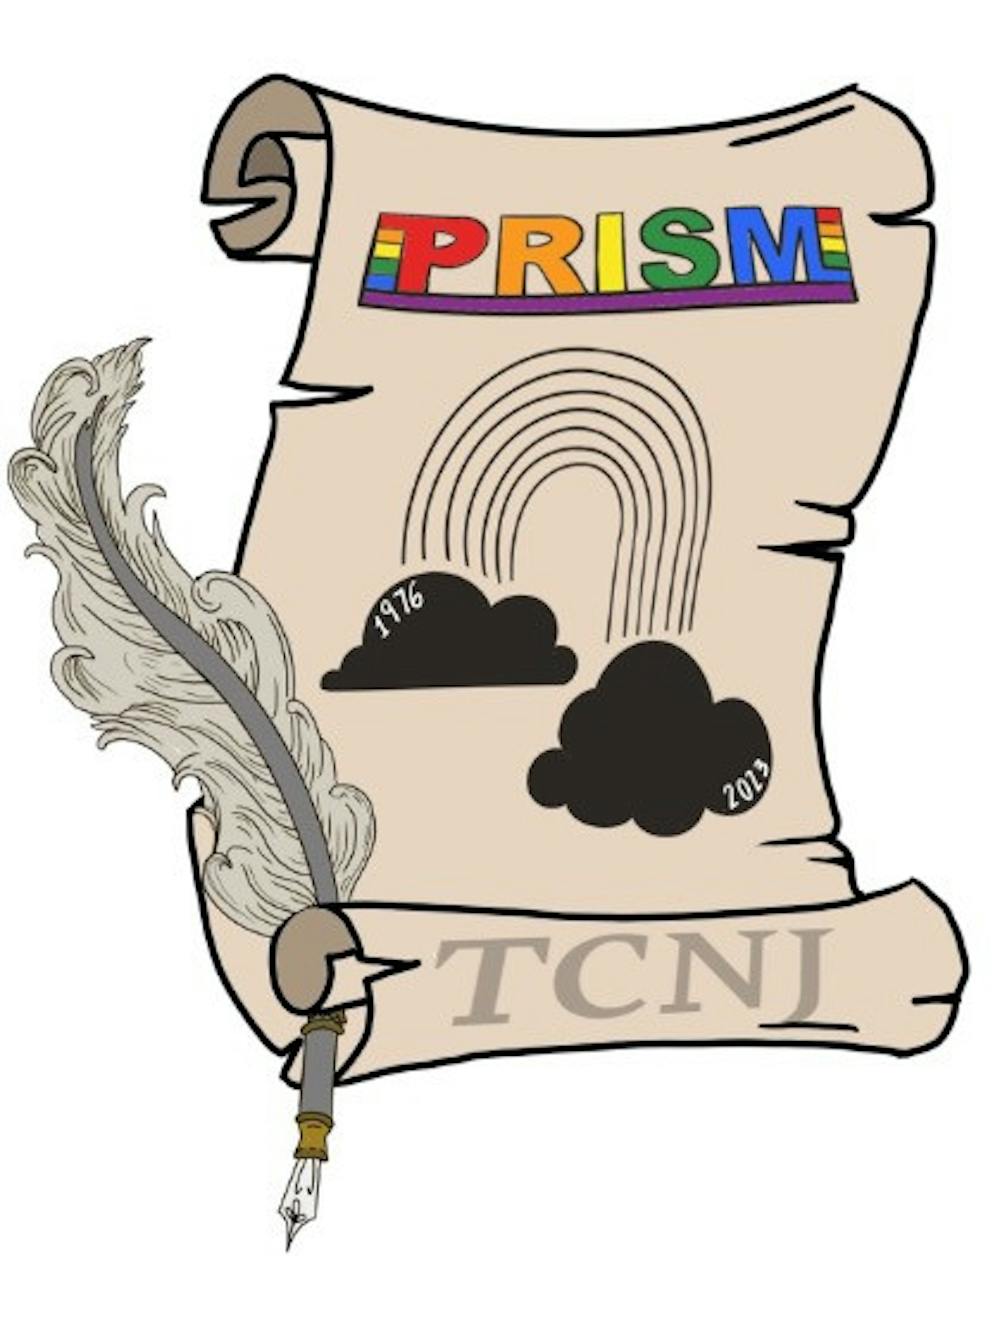 PRISM serves as a place for LGBTQ+ students to find each other on campus (Graphic courtesy of Isabel Smith).